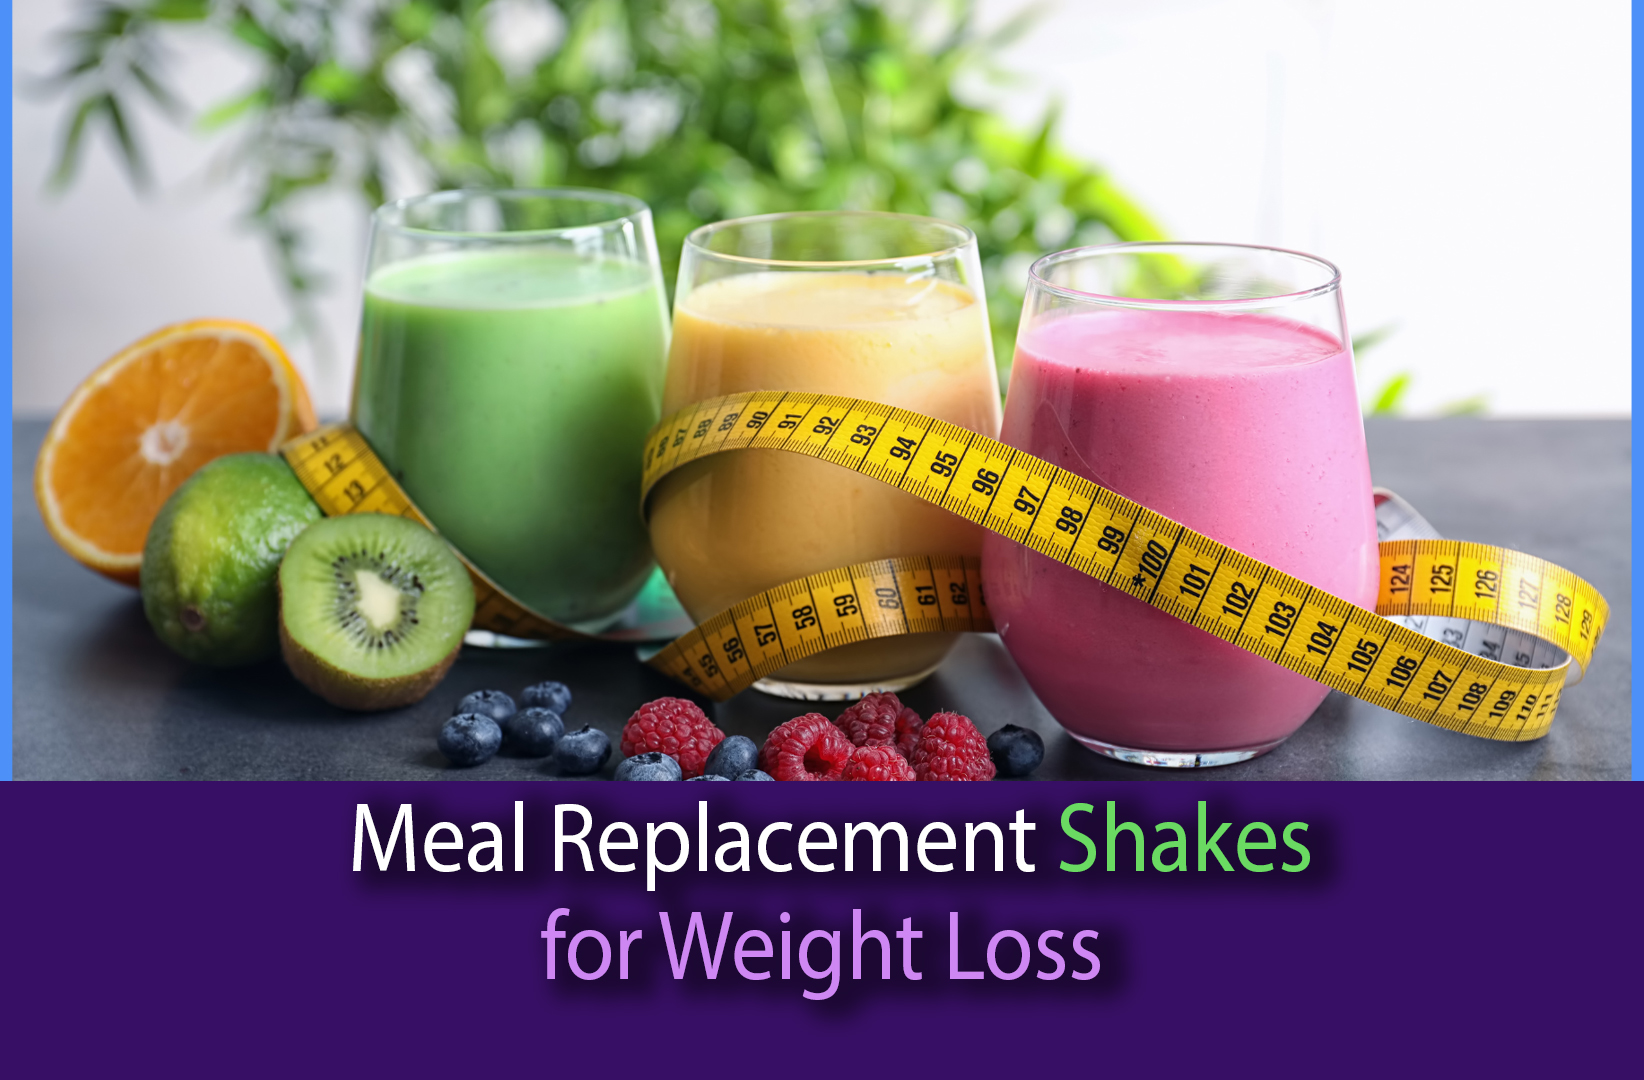 DIY Meal Replacement Shakes for Weight Loss